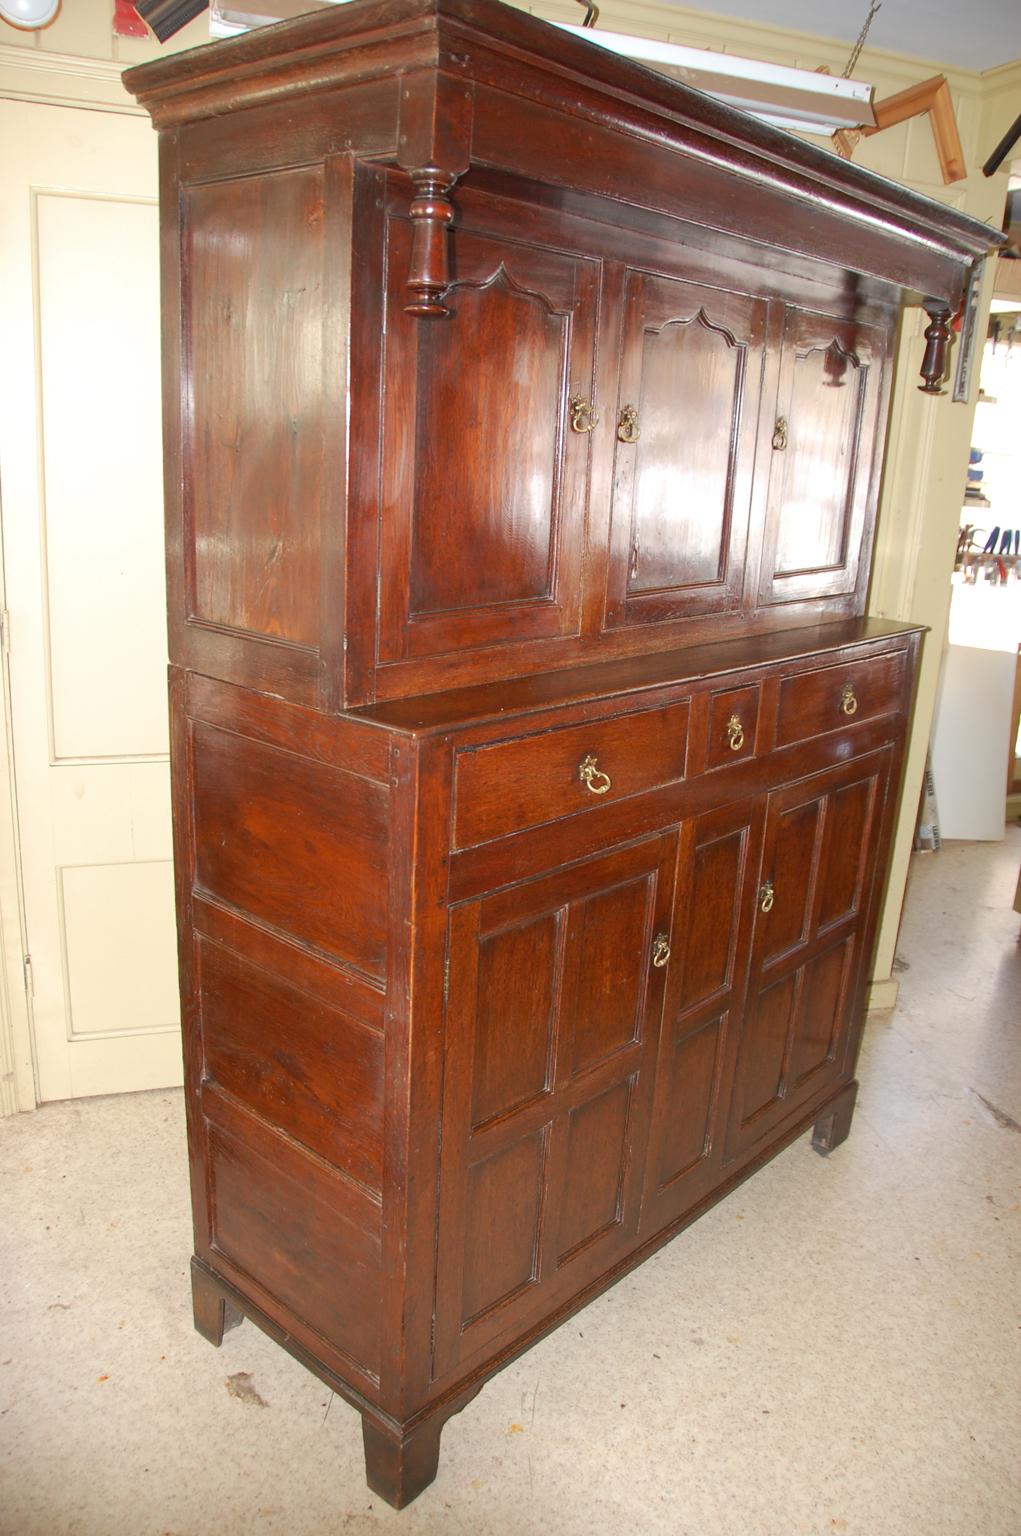 English or Welsh Georgian oak paneled press cupboard with three drawers and five cupboard doors. Behind the cupboard doors are two shelves for storage. The press cupboard was to quote Victor Chinnery 